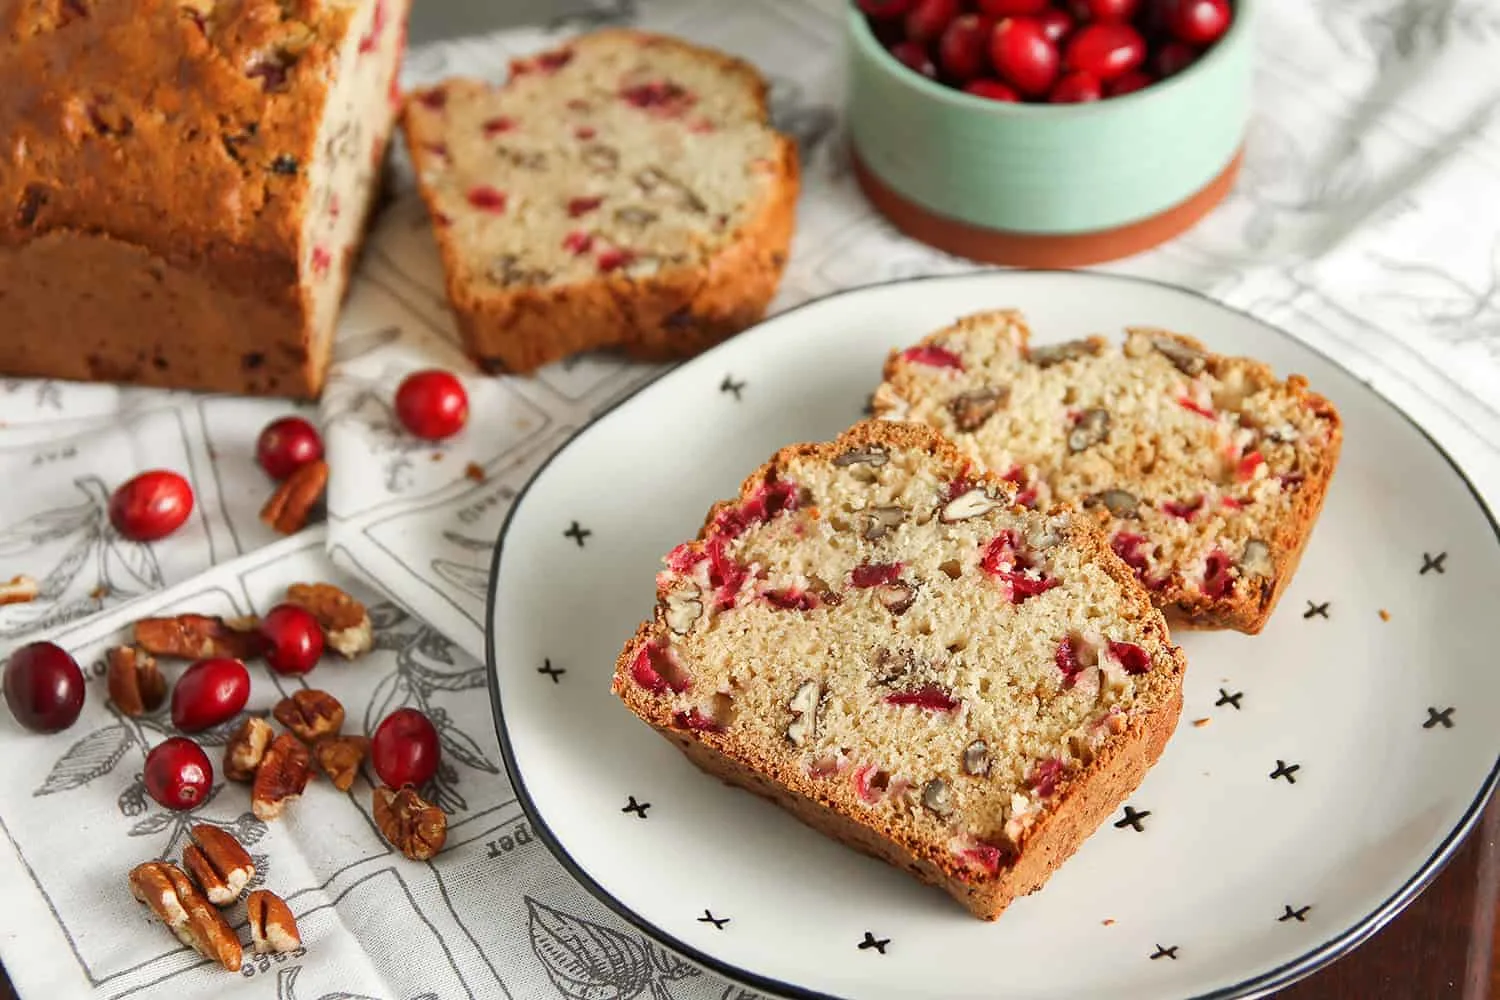 Cranberry Nut Bread is full of fresh cranberries and pecans. This is an easy quick bread you’ll want to make again and again.